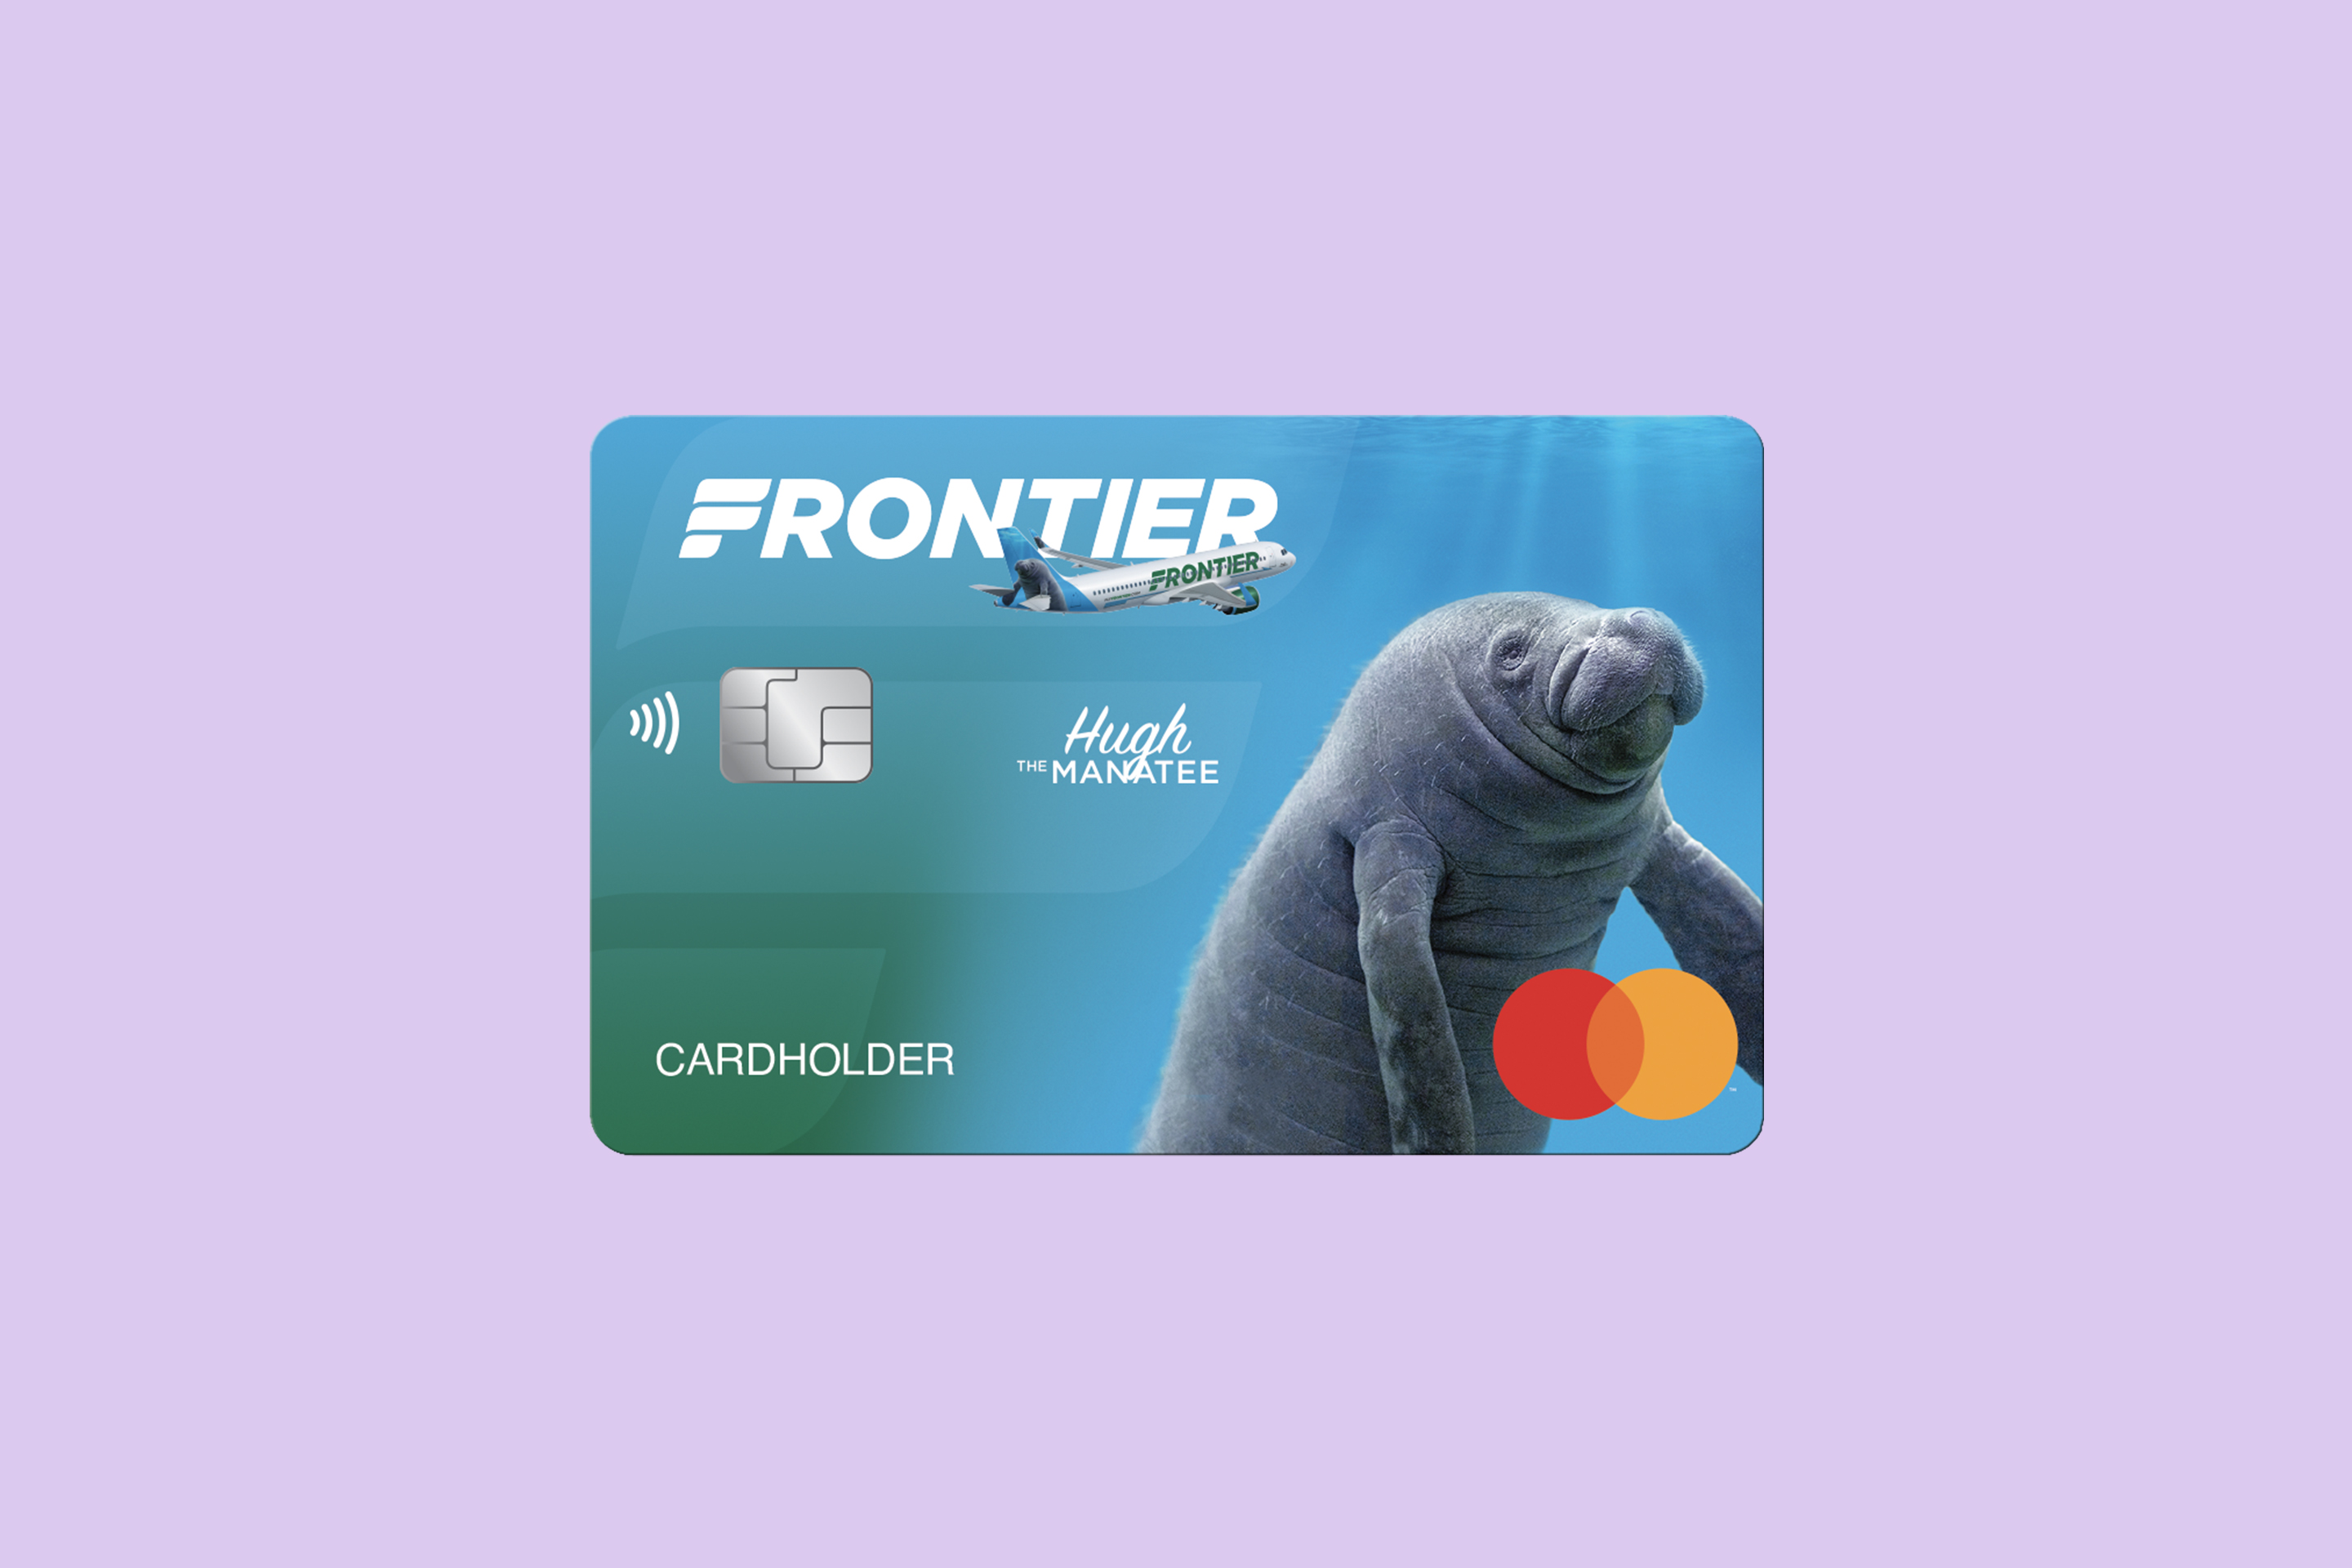 Frontier World Mastercard Credit Card